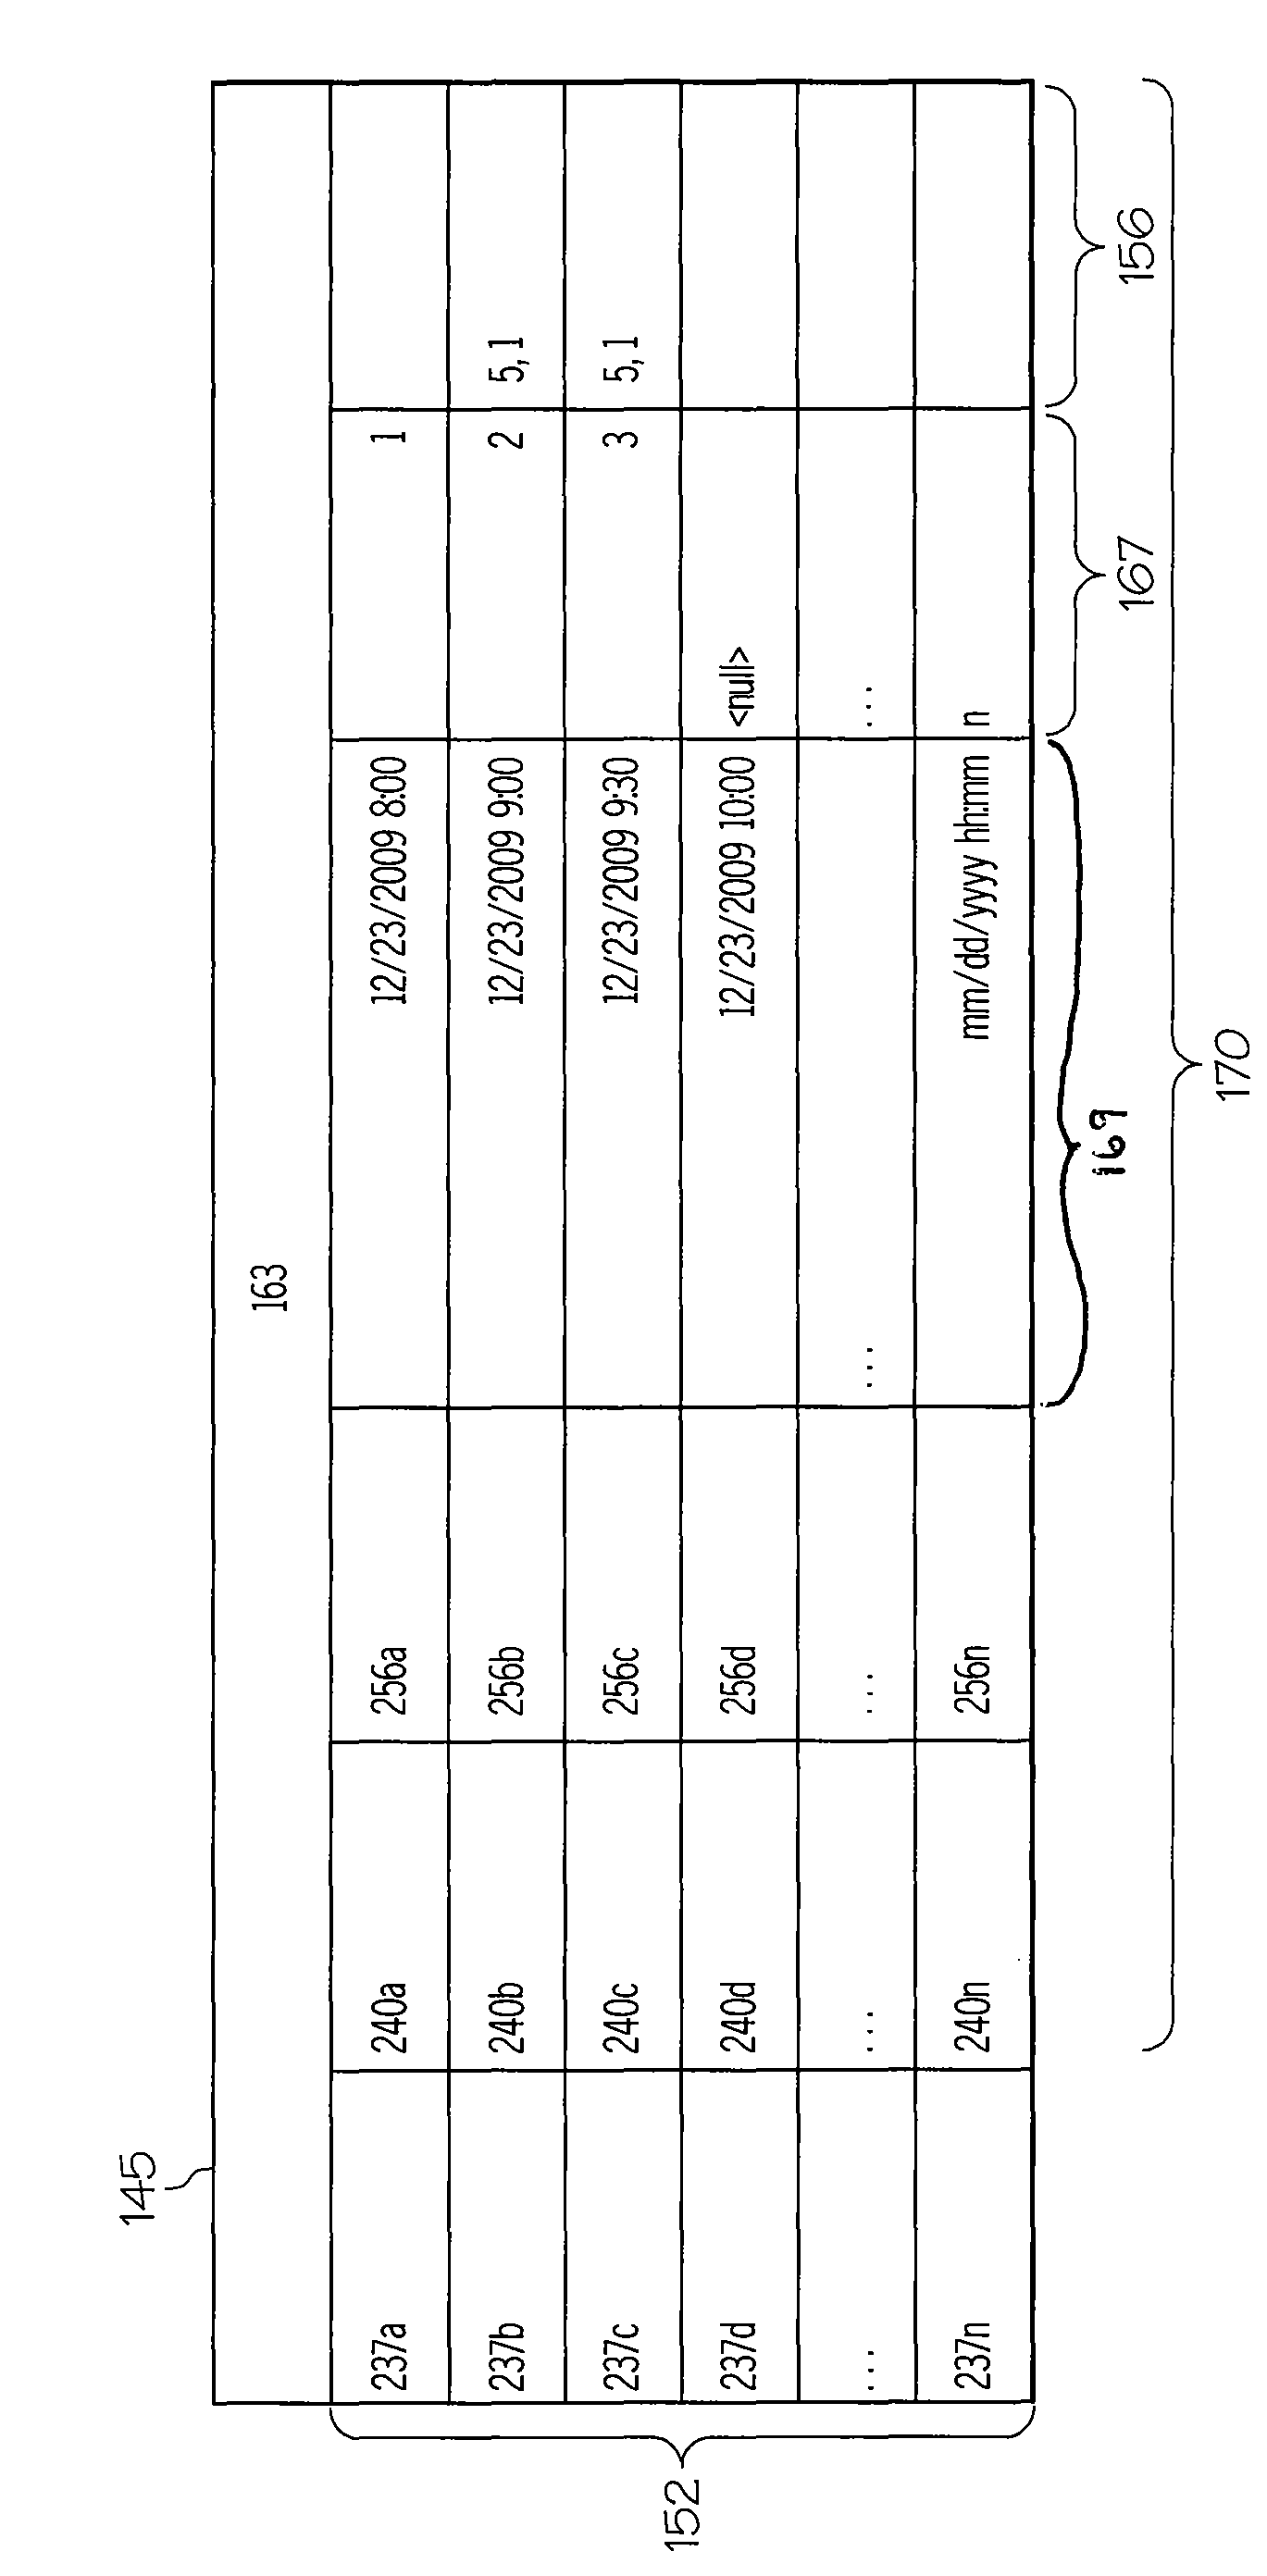 Structured testing method and device for diagnosis or treatment support of chronically ill patients